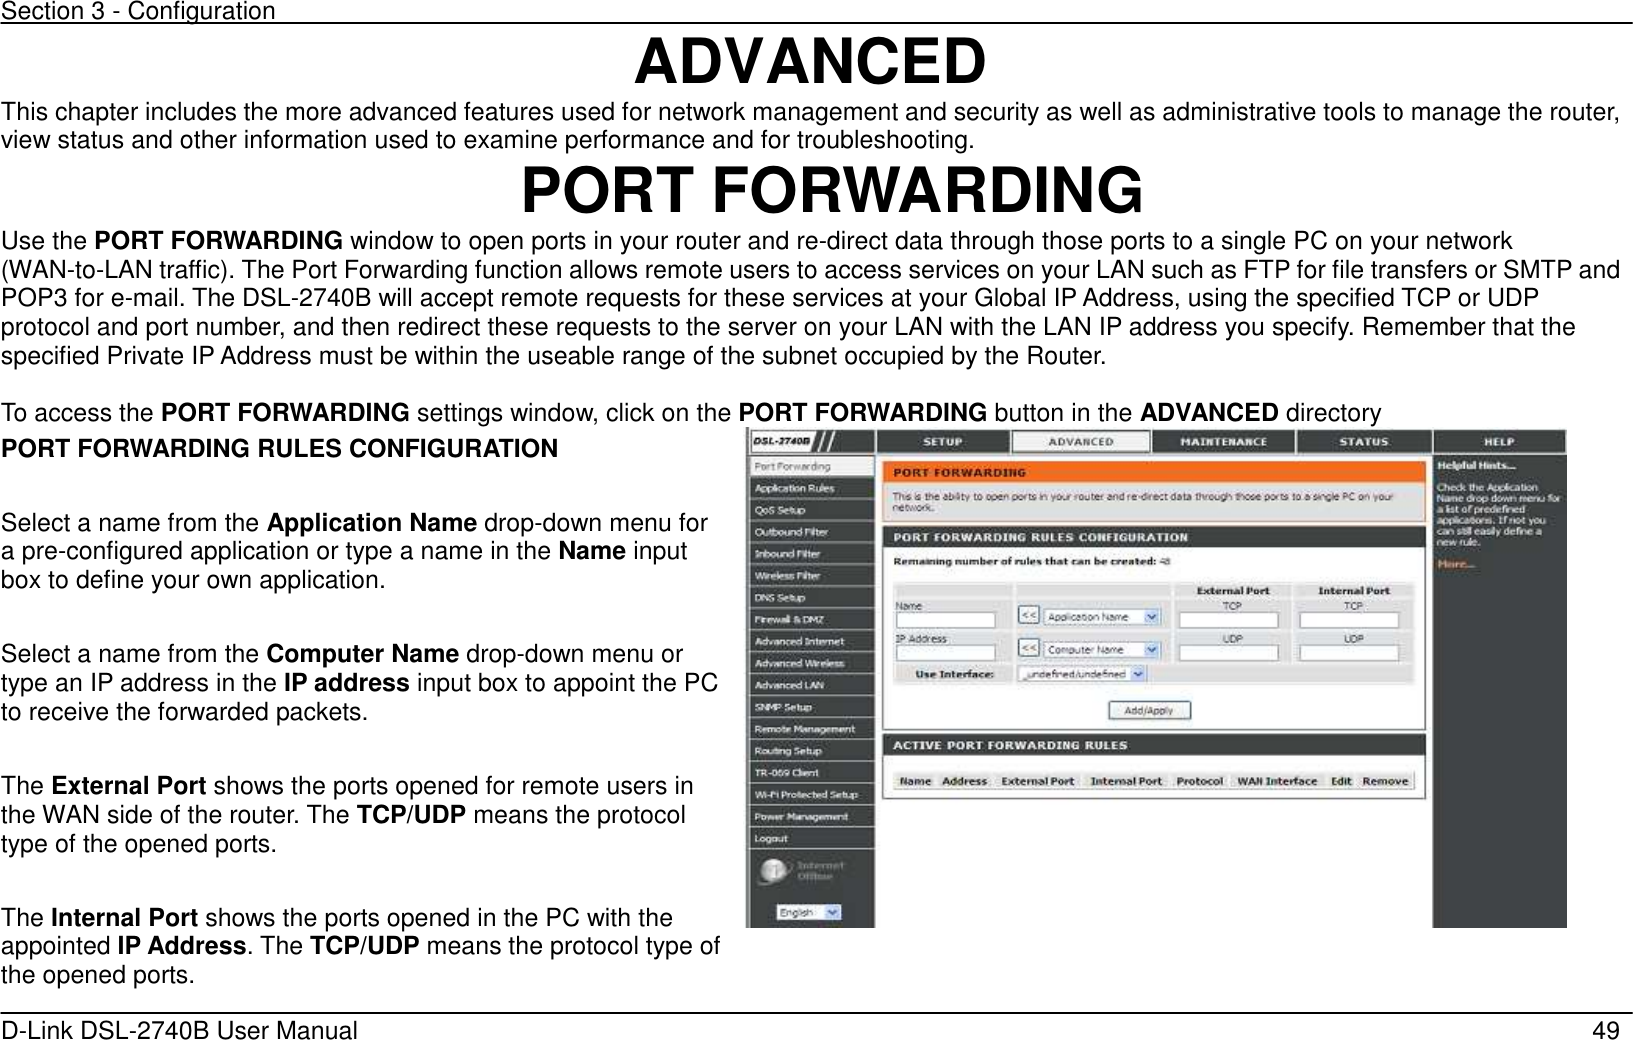 Section 3 - Configuration   D-Link DSL-2740B User Manual                                                  49 ADVANCED This chapter includes the more advanced features used for network management and security as well as administrative tools to manage the router, view status and other information used to examine performance and for troubleshooting.   PORT FORWARDING Use the PORT FORWARDING window to open ports in your router and re-direct data through those ports to a single PC on your network (WAN-to-LAN traffic). The Port Forwarding function allows remote users to access services on your LAN such as FTP for file transfers or SMTP and POP3 for e-mail. The DSL-2740B will accept remote requests for these services at your Global IP Address, using the specified TCP or UDP protocol and port number, and then redirect these requests to the server on your LAN with the LAN IP address you specify. Remember that the specified Private IP Address must be within the useable range of the subnet occupied by the Router.  To access the PORT FORWARDING settings window, click on the PORT FORWARDING button in the ADVANCED directory PORT FORWARDING RULES CONFIGURATION  Select a name from the Application Name drop-down menu for a pre-configured application or type a name in the Name input box to define your own application.  Select a name from the Computer Name drop-down menu or type an IP address in the IP address input box to appoint the PC to receive the forwarded packets.  The External Port shows the ports opened for remote users in the WAN side of the router. The TCP/UDP means the protocol type of the opened ports.    The Internal Port shows the ports opened in the PC with the appointed IP Address. The TCP/UDP means the protocol type of the opened ports.    